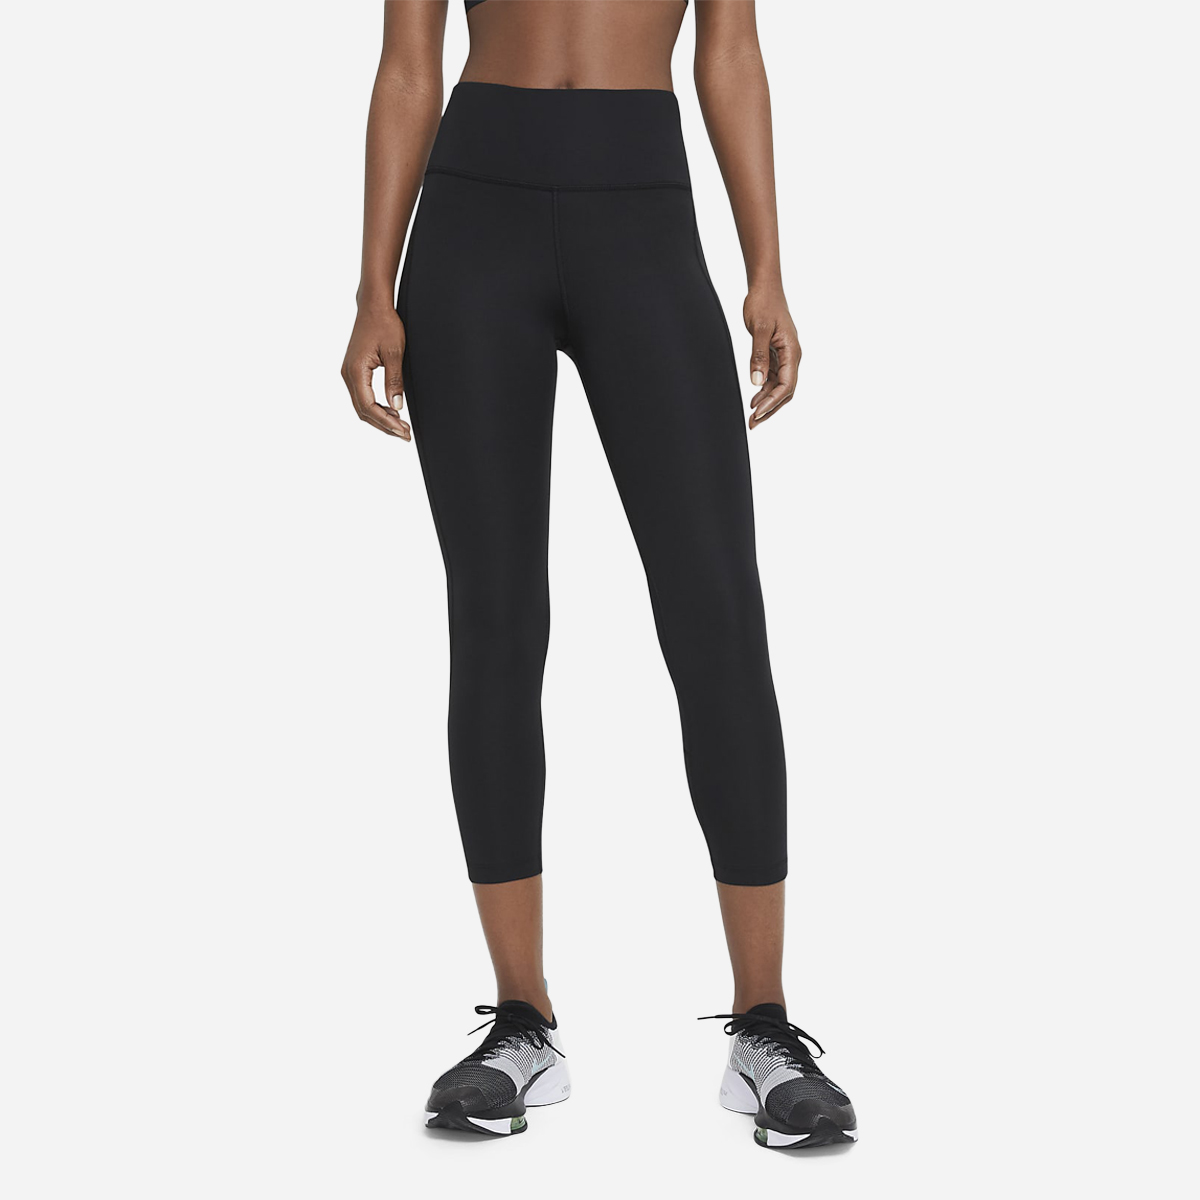 AN264275 Epic Fast Women's Cropped Running Tight